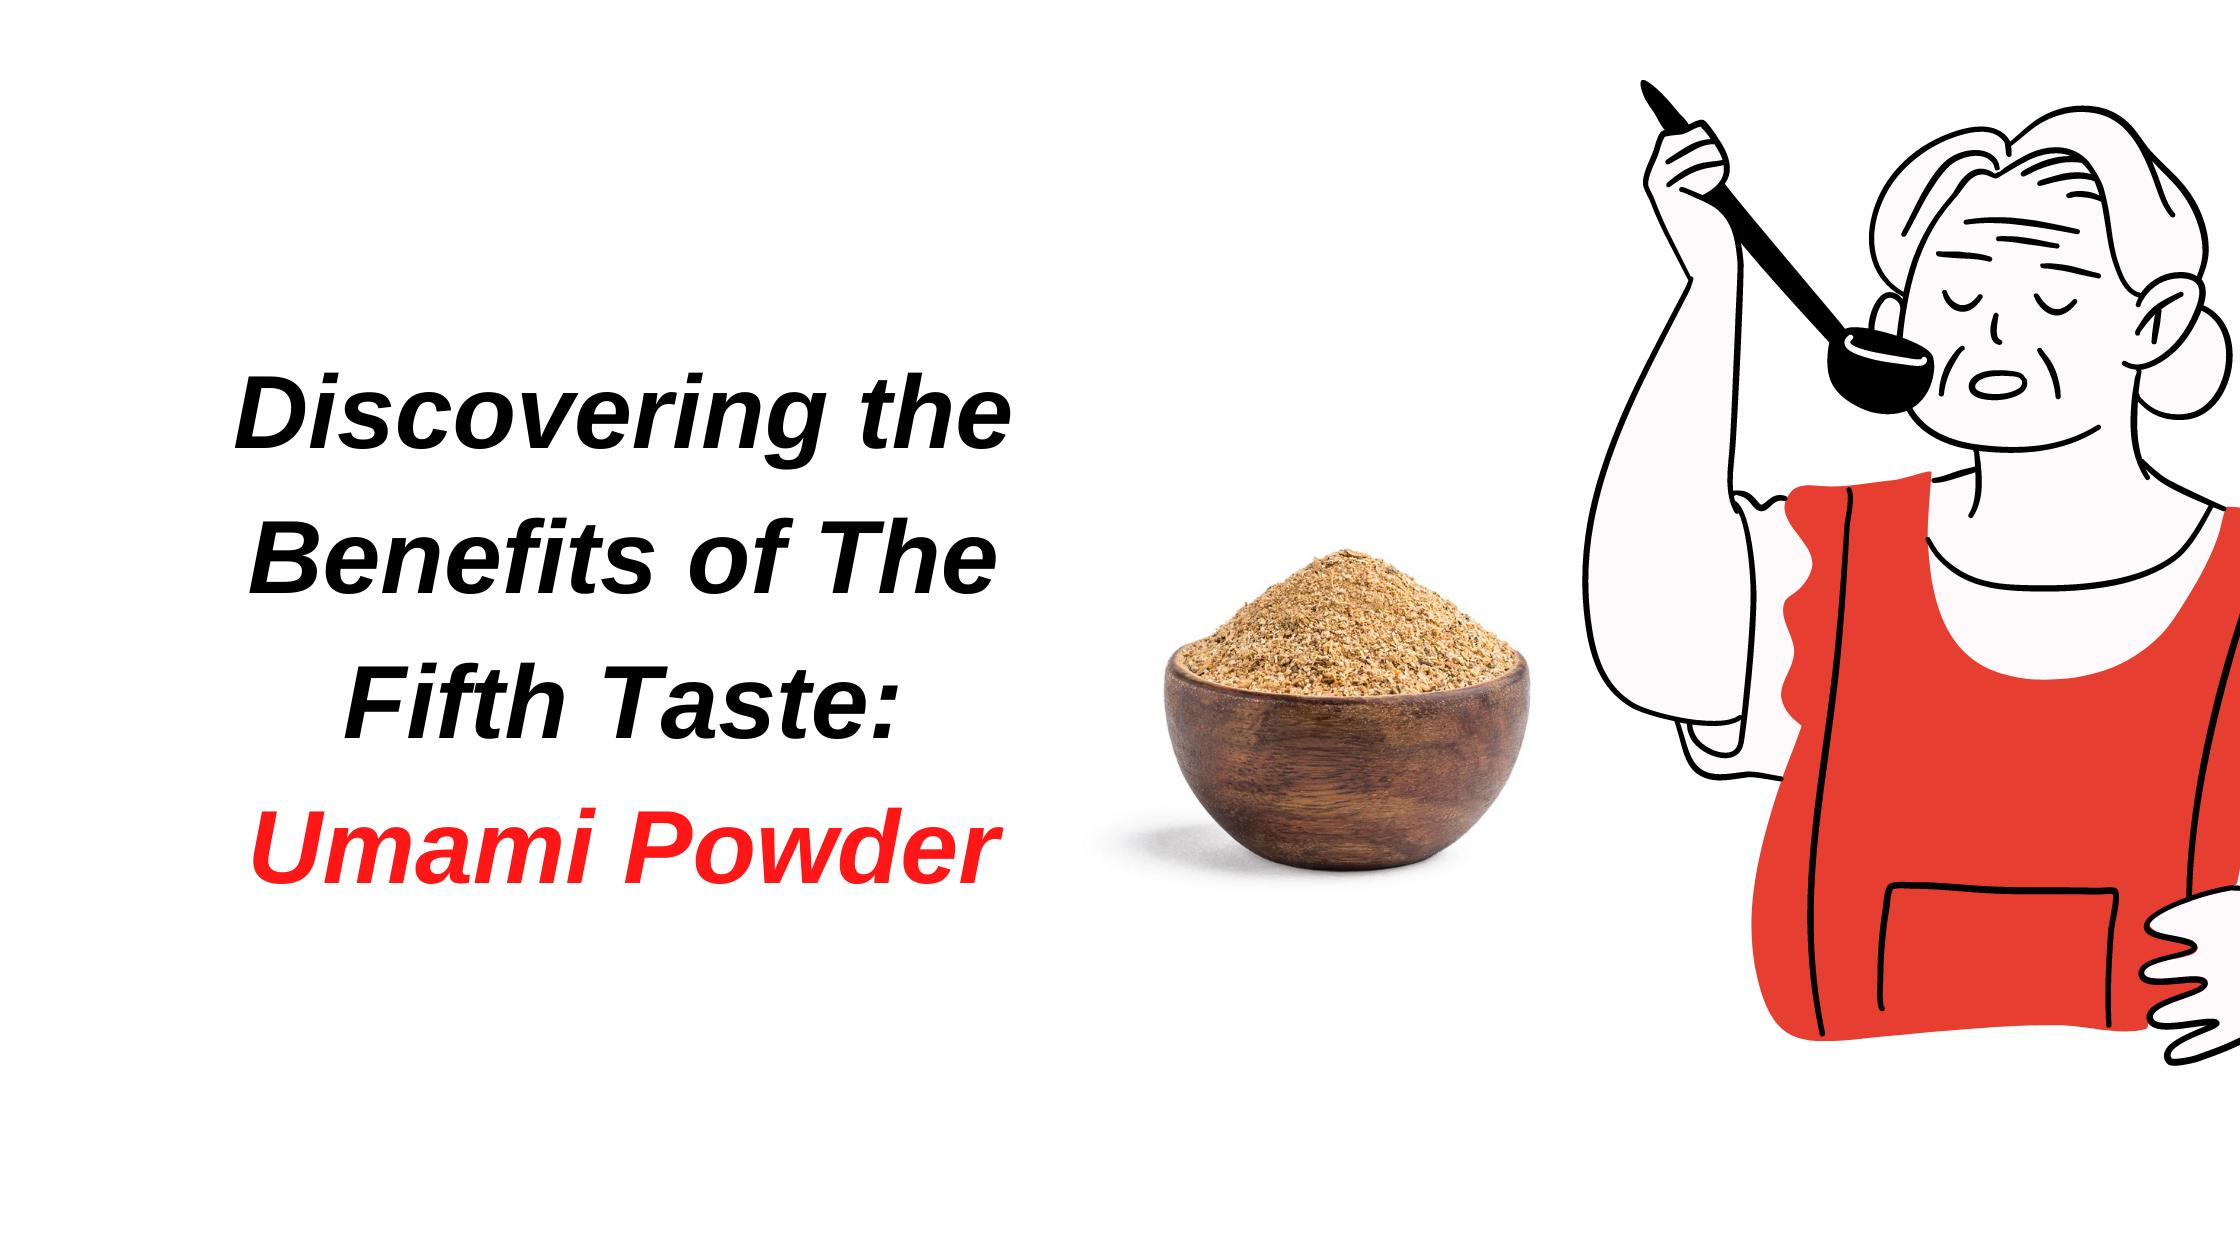 Discovering the Benefits of The Fifth Taste: Umami Powder